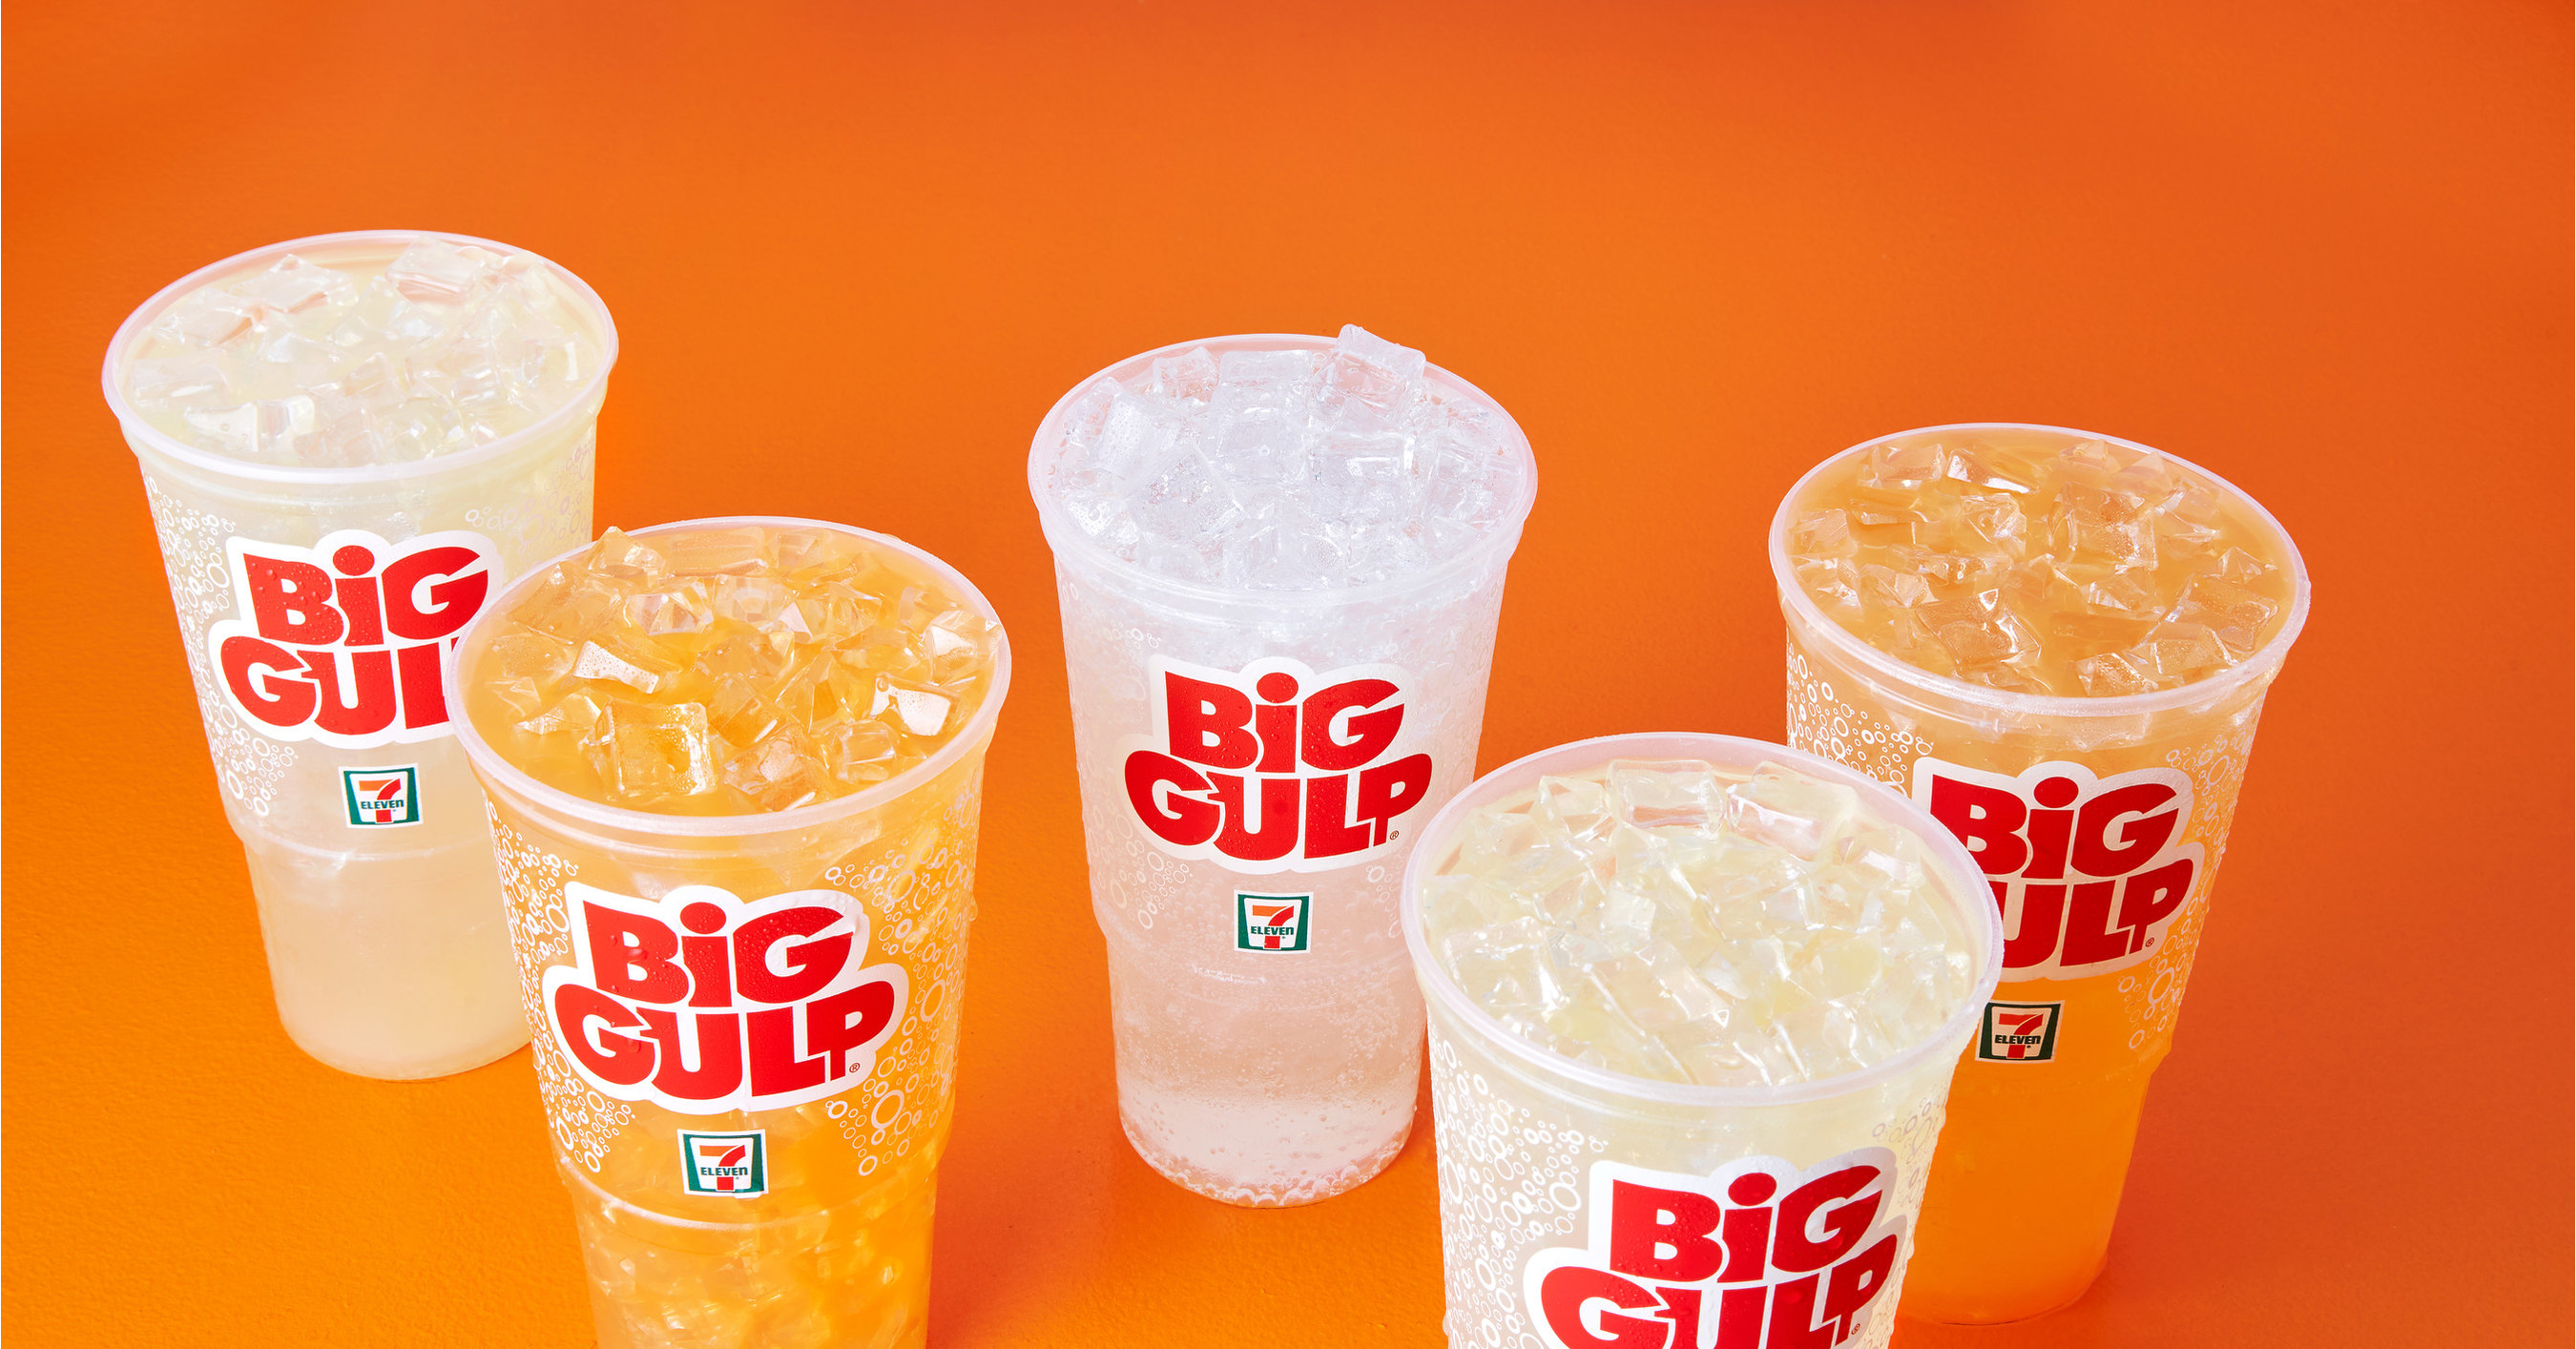 Get Refreshed at 7-Eleven® with Big Gulp's Five New Drinks